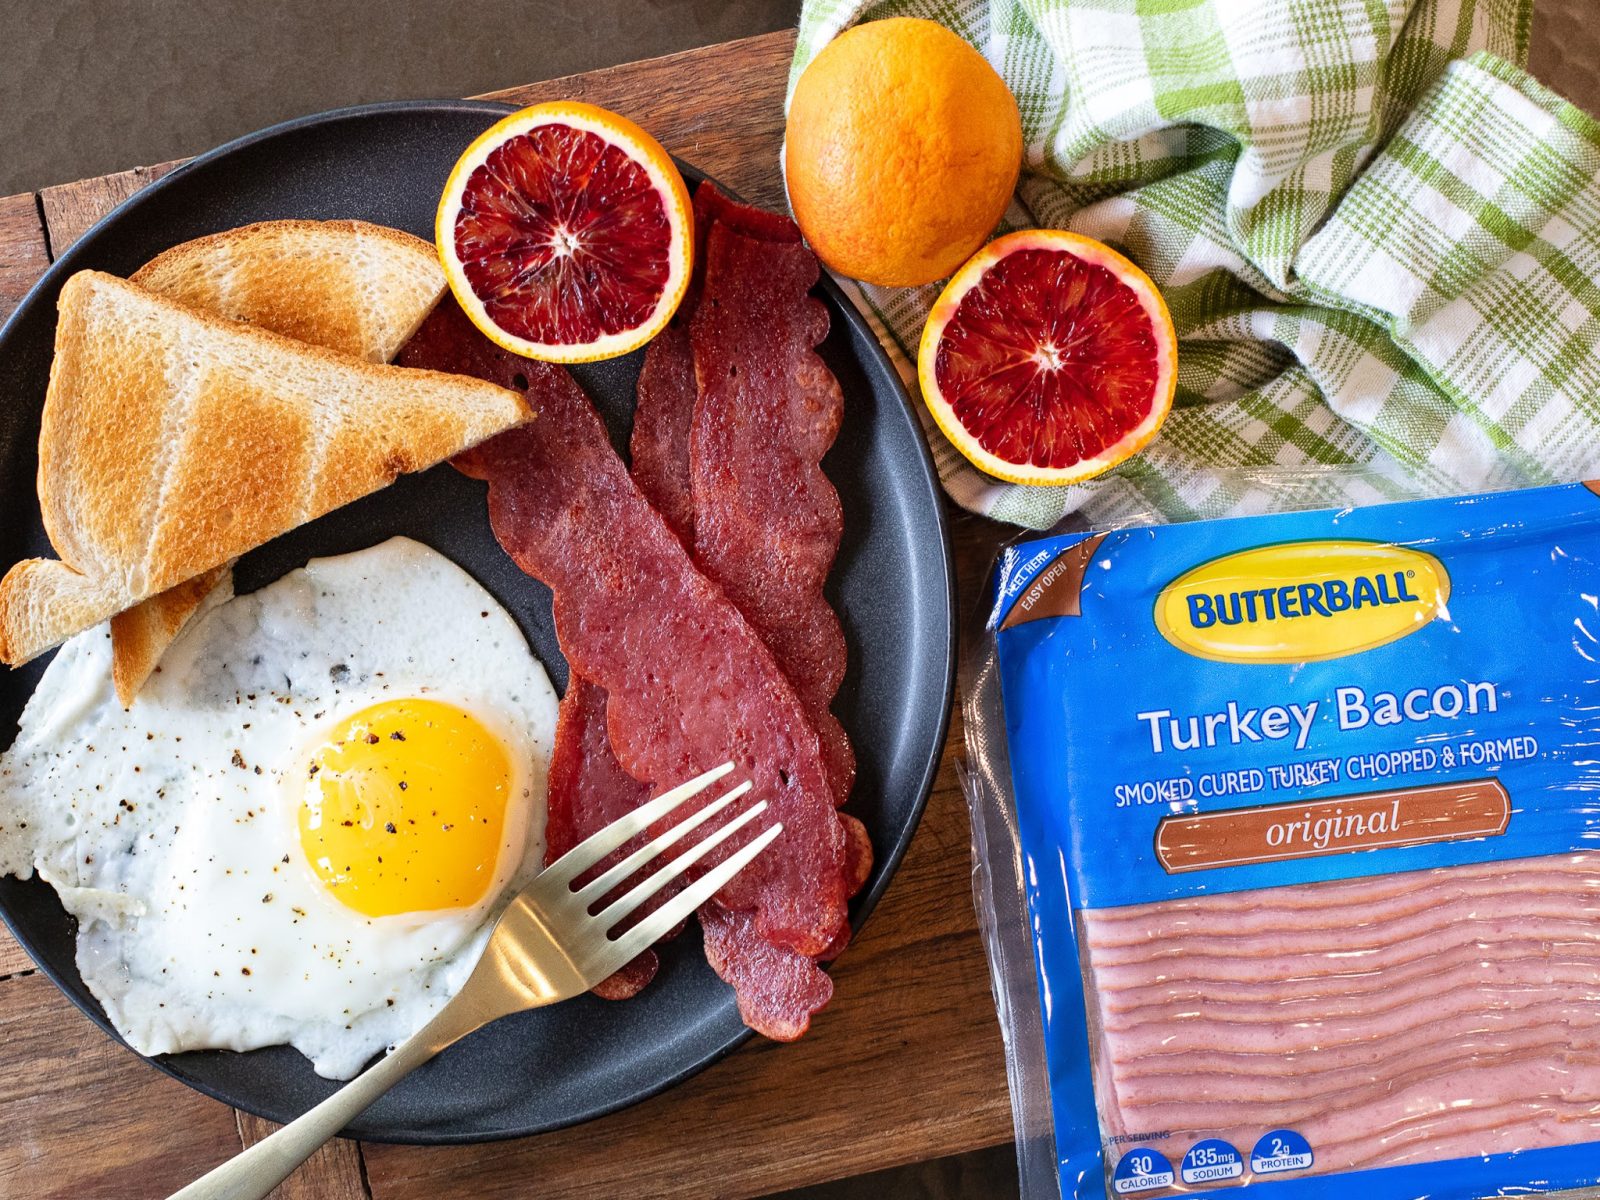 Butterball Turkey Bacon As Low As $2.99 At Kroger